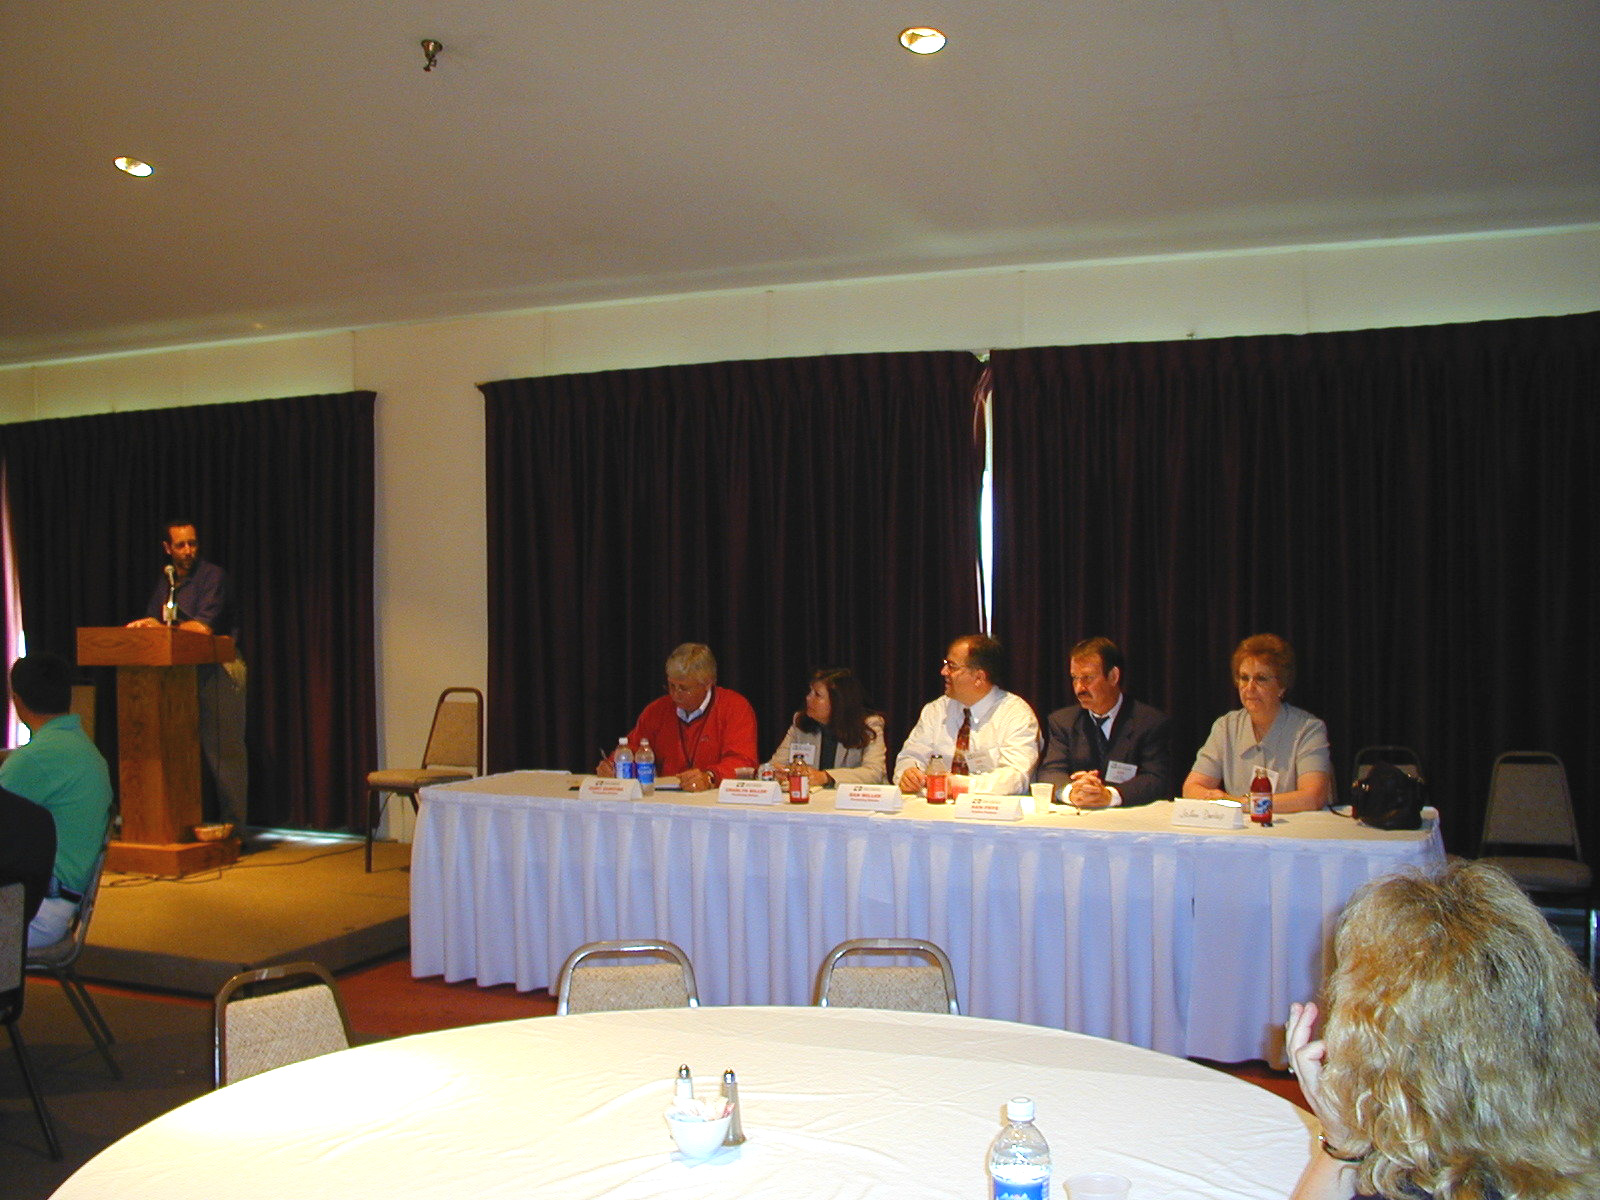 Panel discussions played a major role in the 2000 Vendor Purchasing Conference